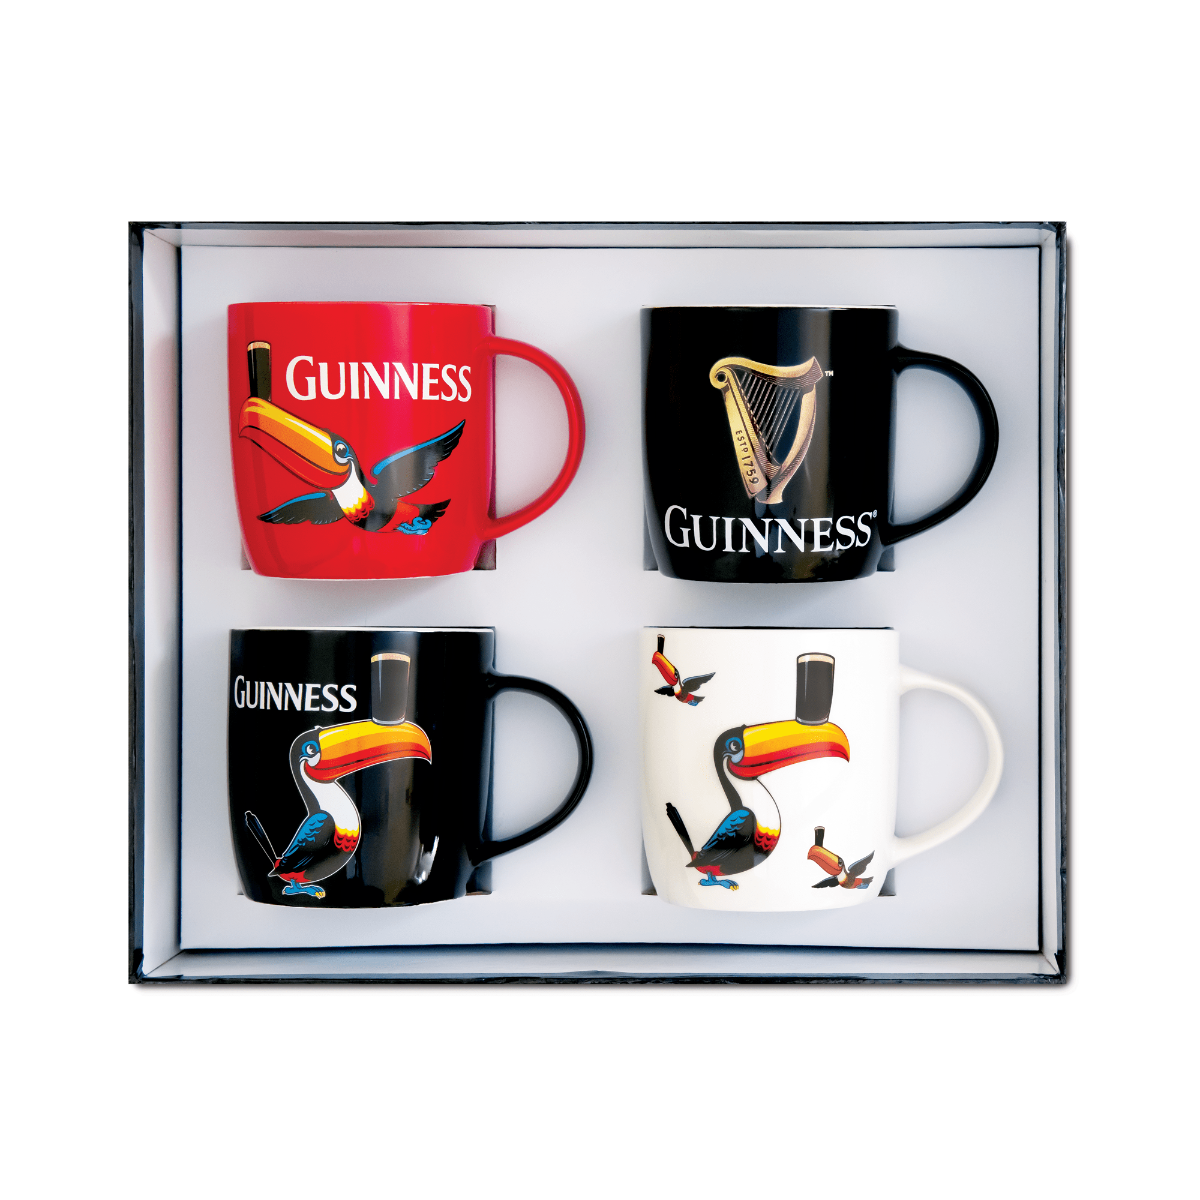 Guinness Toucan Mug Set featuring four Guinness mugs in a box.